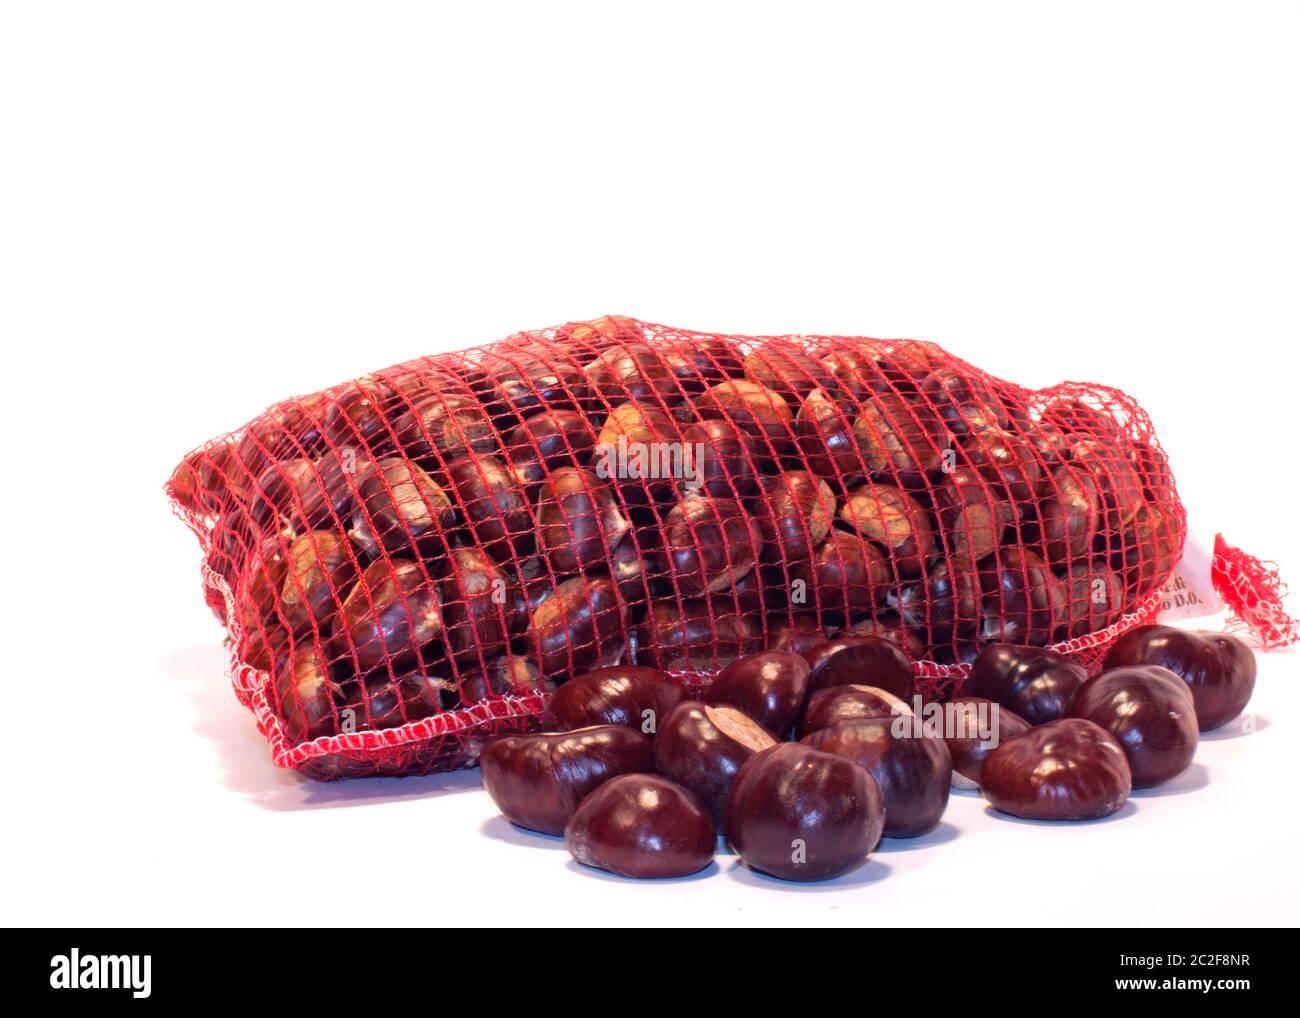 plastic bag with chestnuts inside Stock Photo